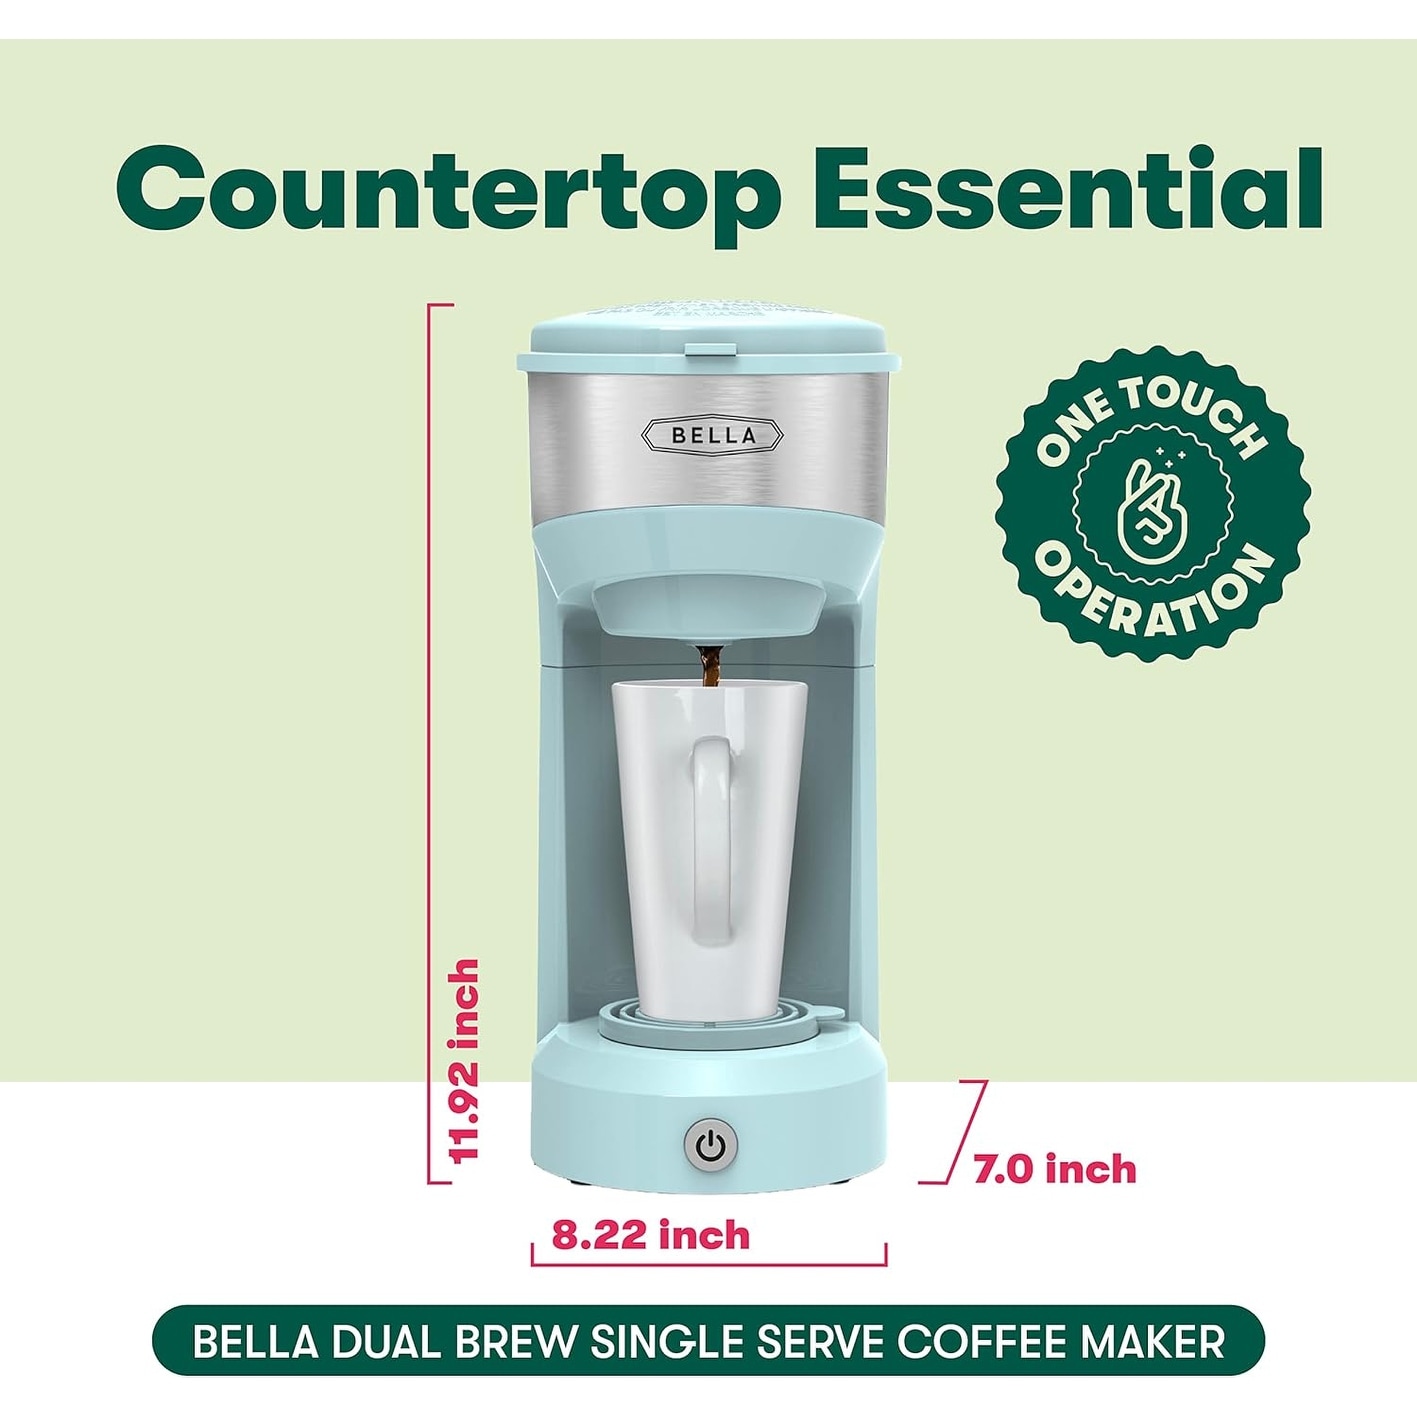 https://ak1.ostkcdn.com/images/products/is/images/direct/aefa439e8270ecb301a1fbd127ff045cd5834a51/Dual-Brew-Single-Serve-Coffee-Maker%2C-Carefree-Auto-Shut-Off-%26-Adjustable-Tray.jpg